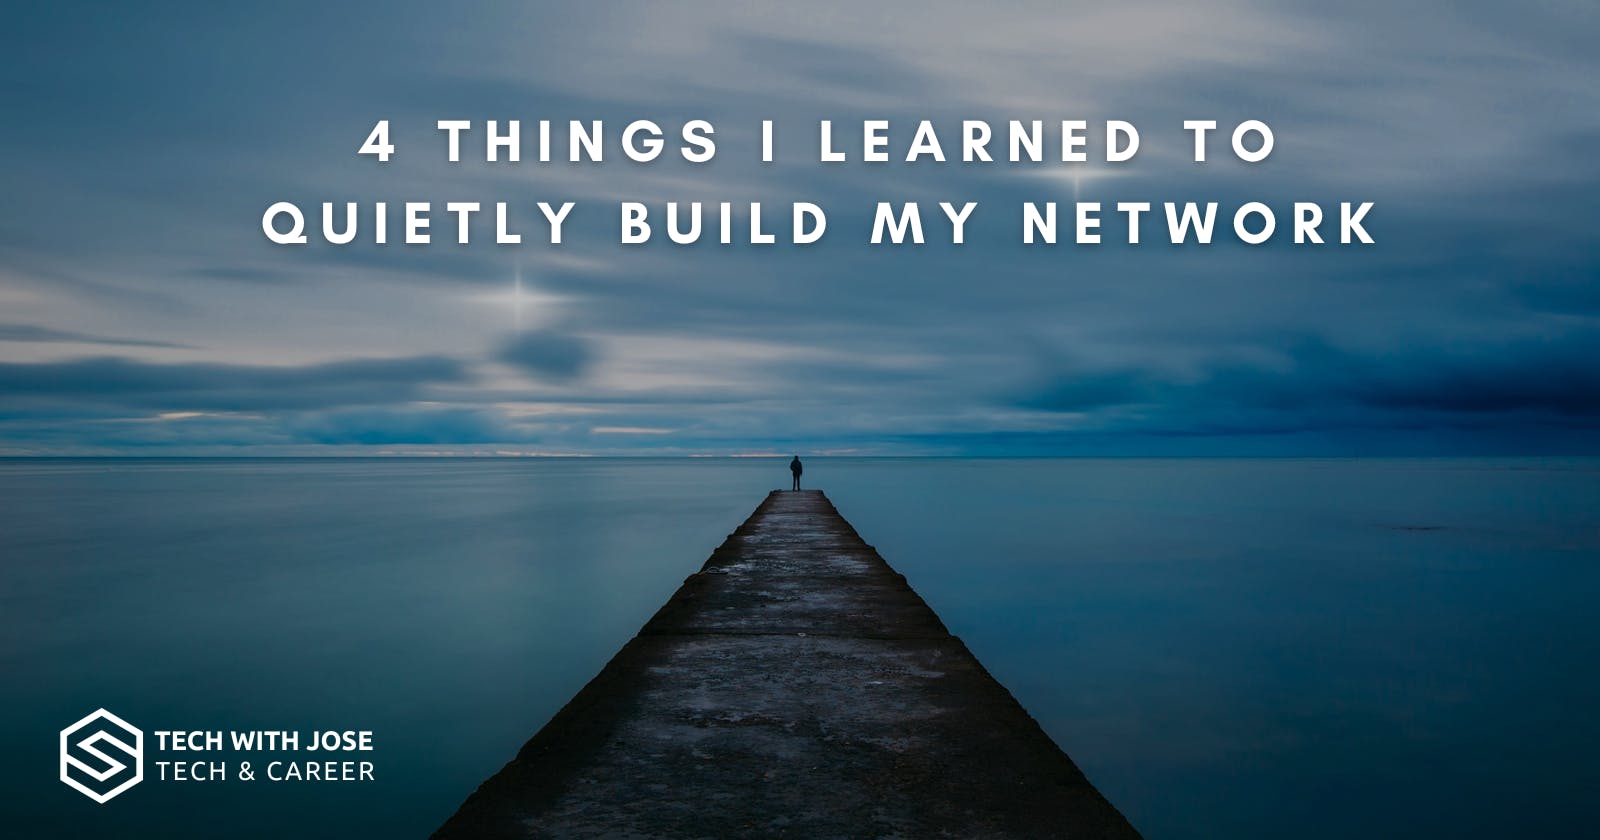 4 Things I Learned To Quietly Build My Network as an Introvert